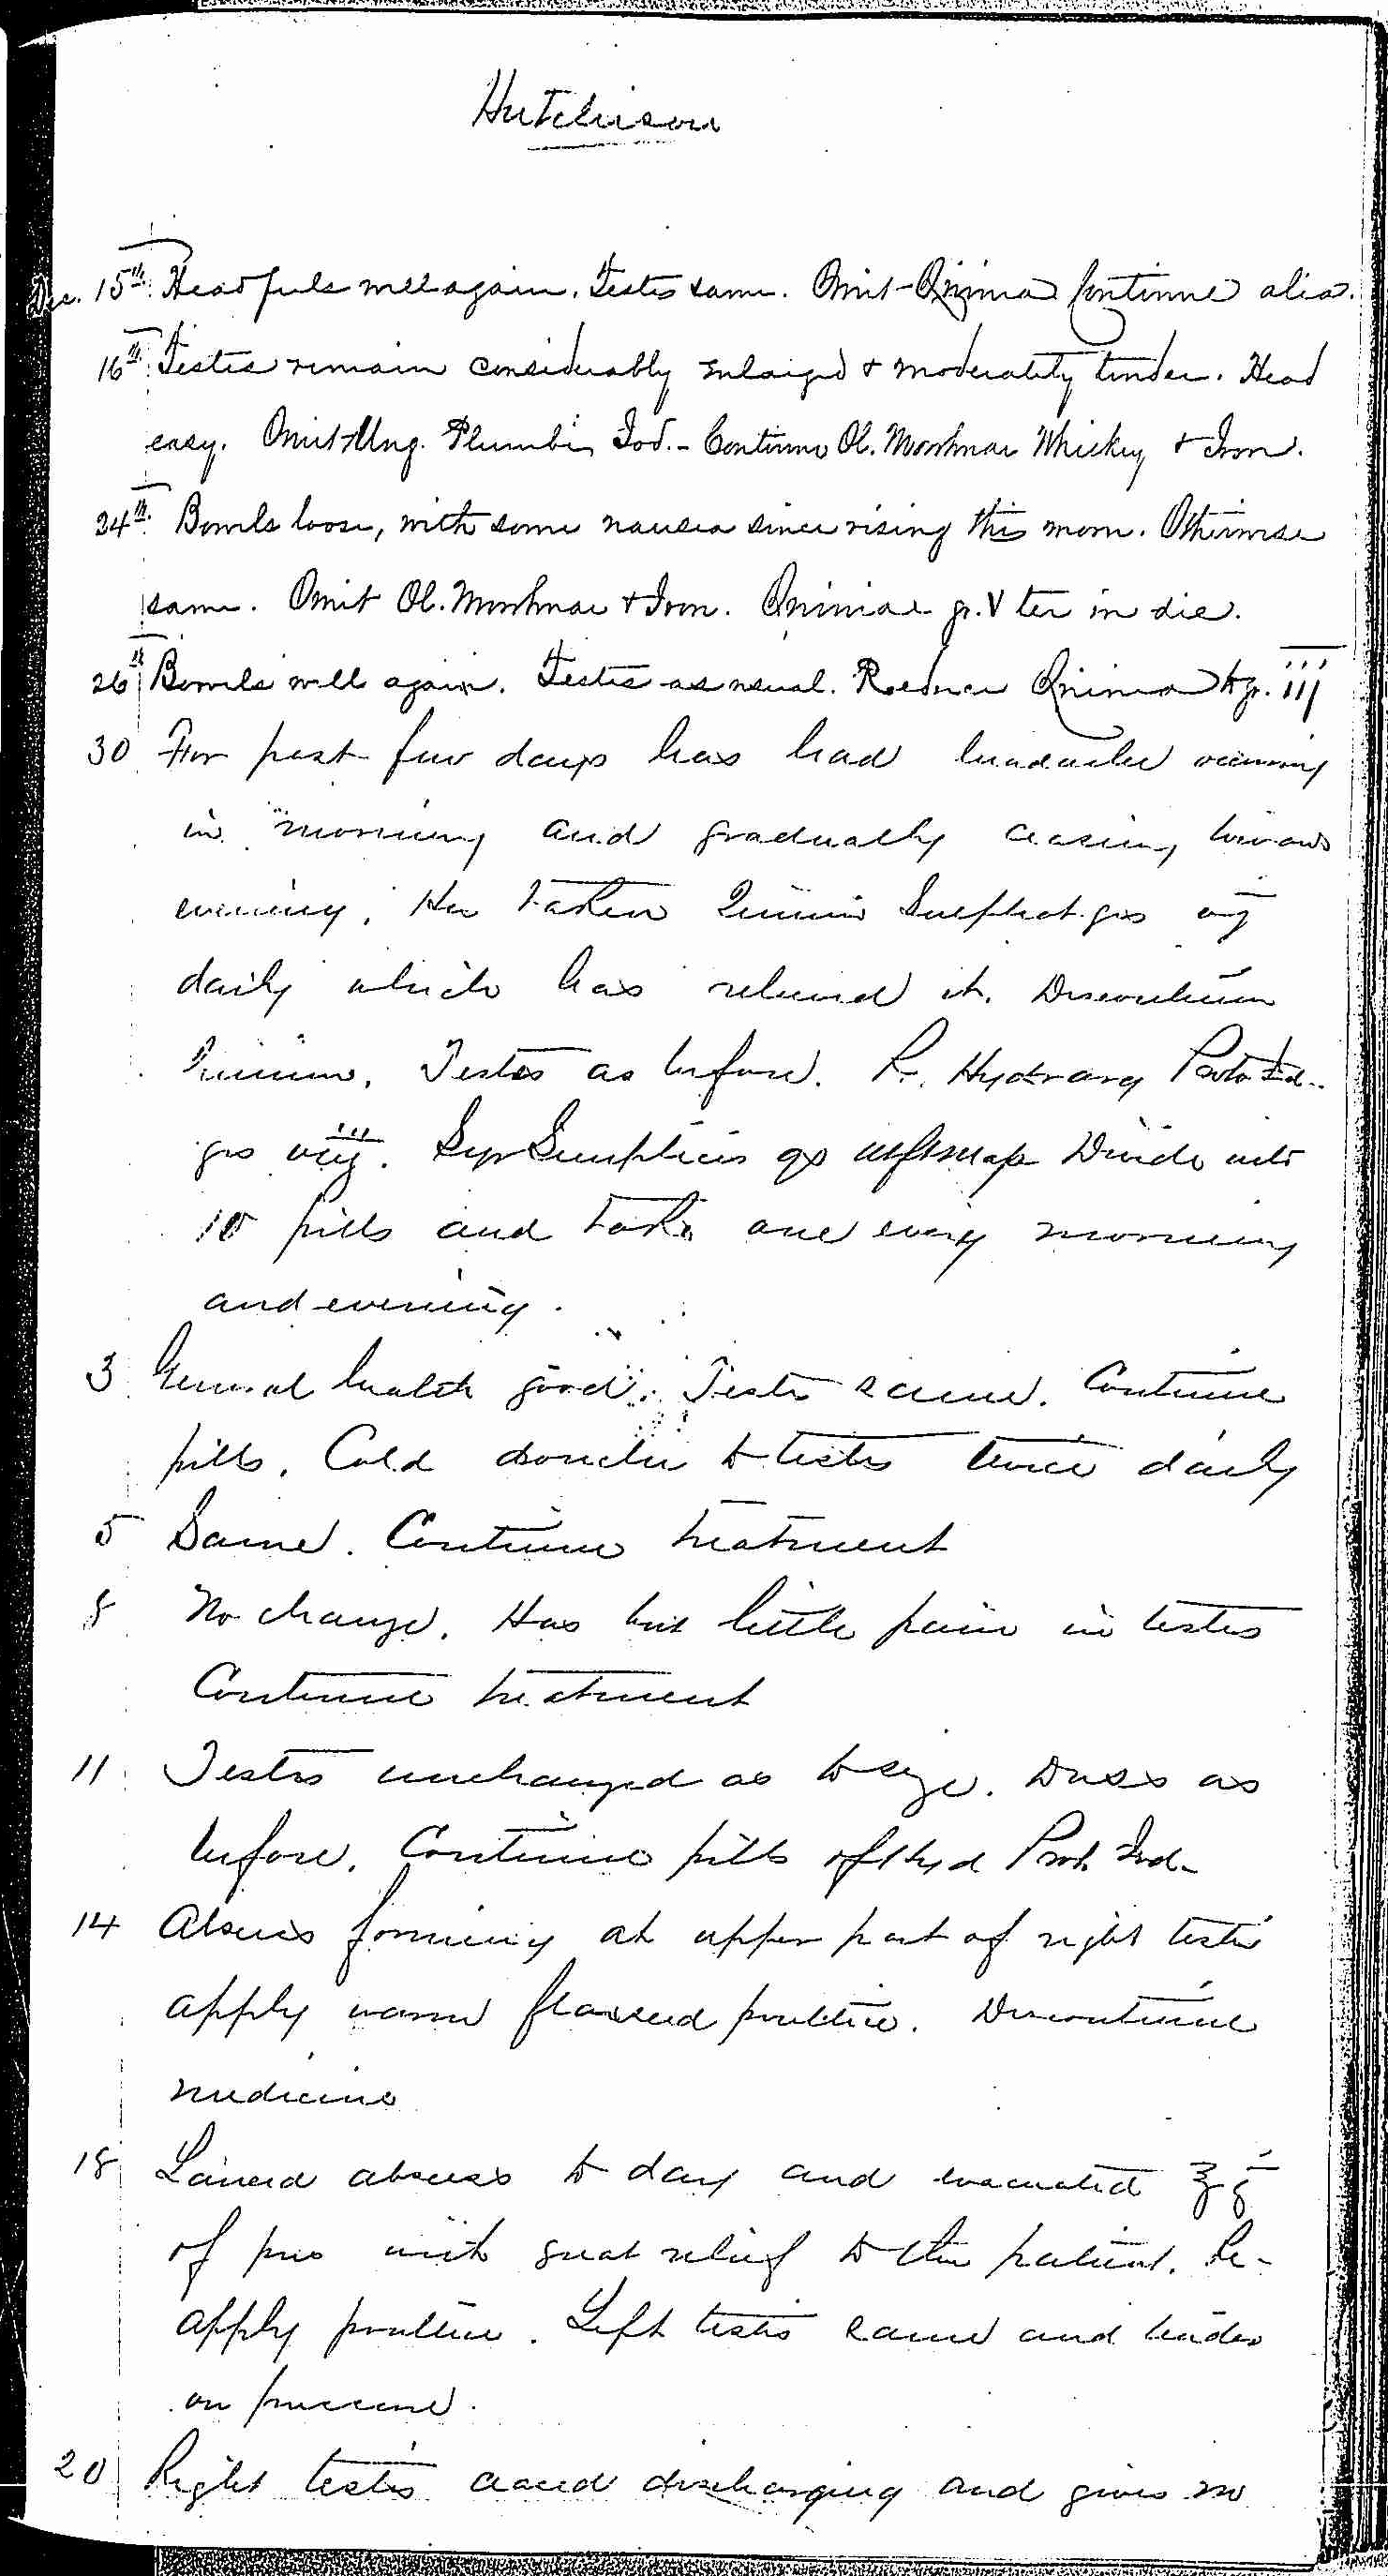 Entry for John C. Hutchinson (page 3 of 4) in the log Hospital Tickets and Case Papers - Naval Hospital - Washington, D.C. - 1868-69